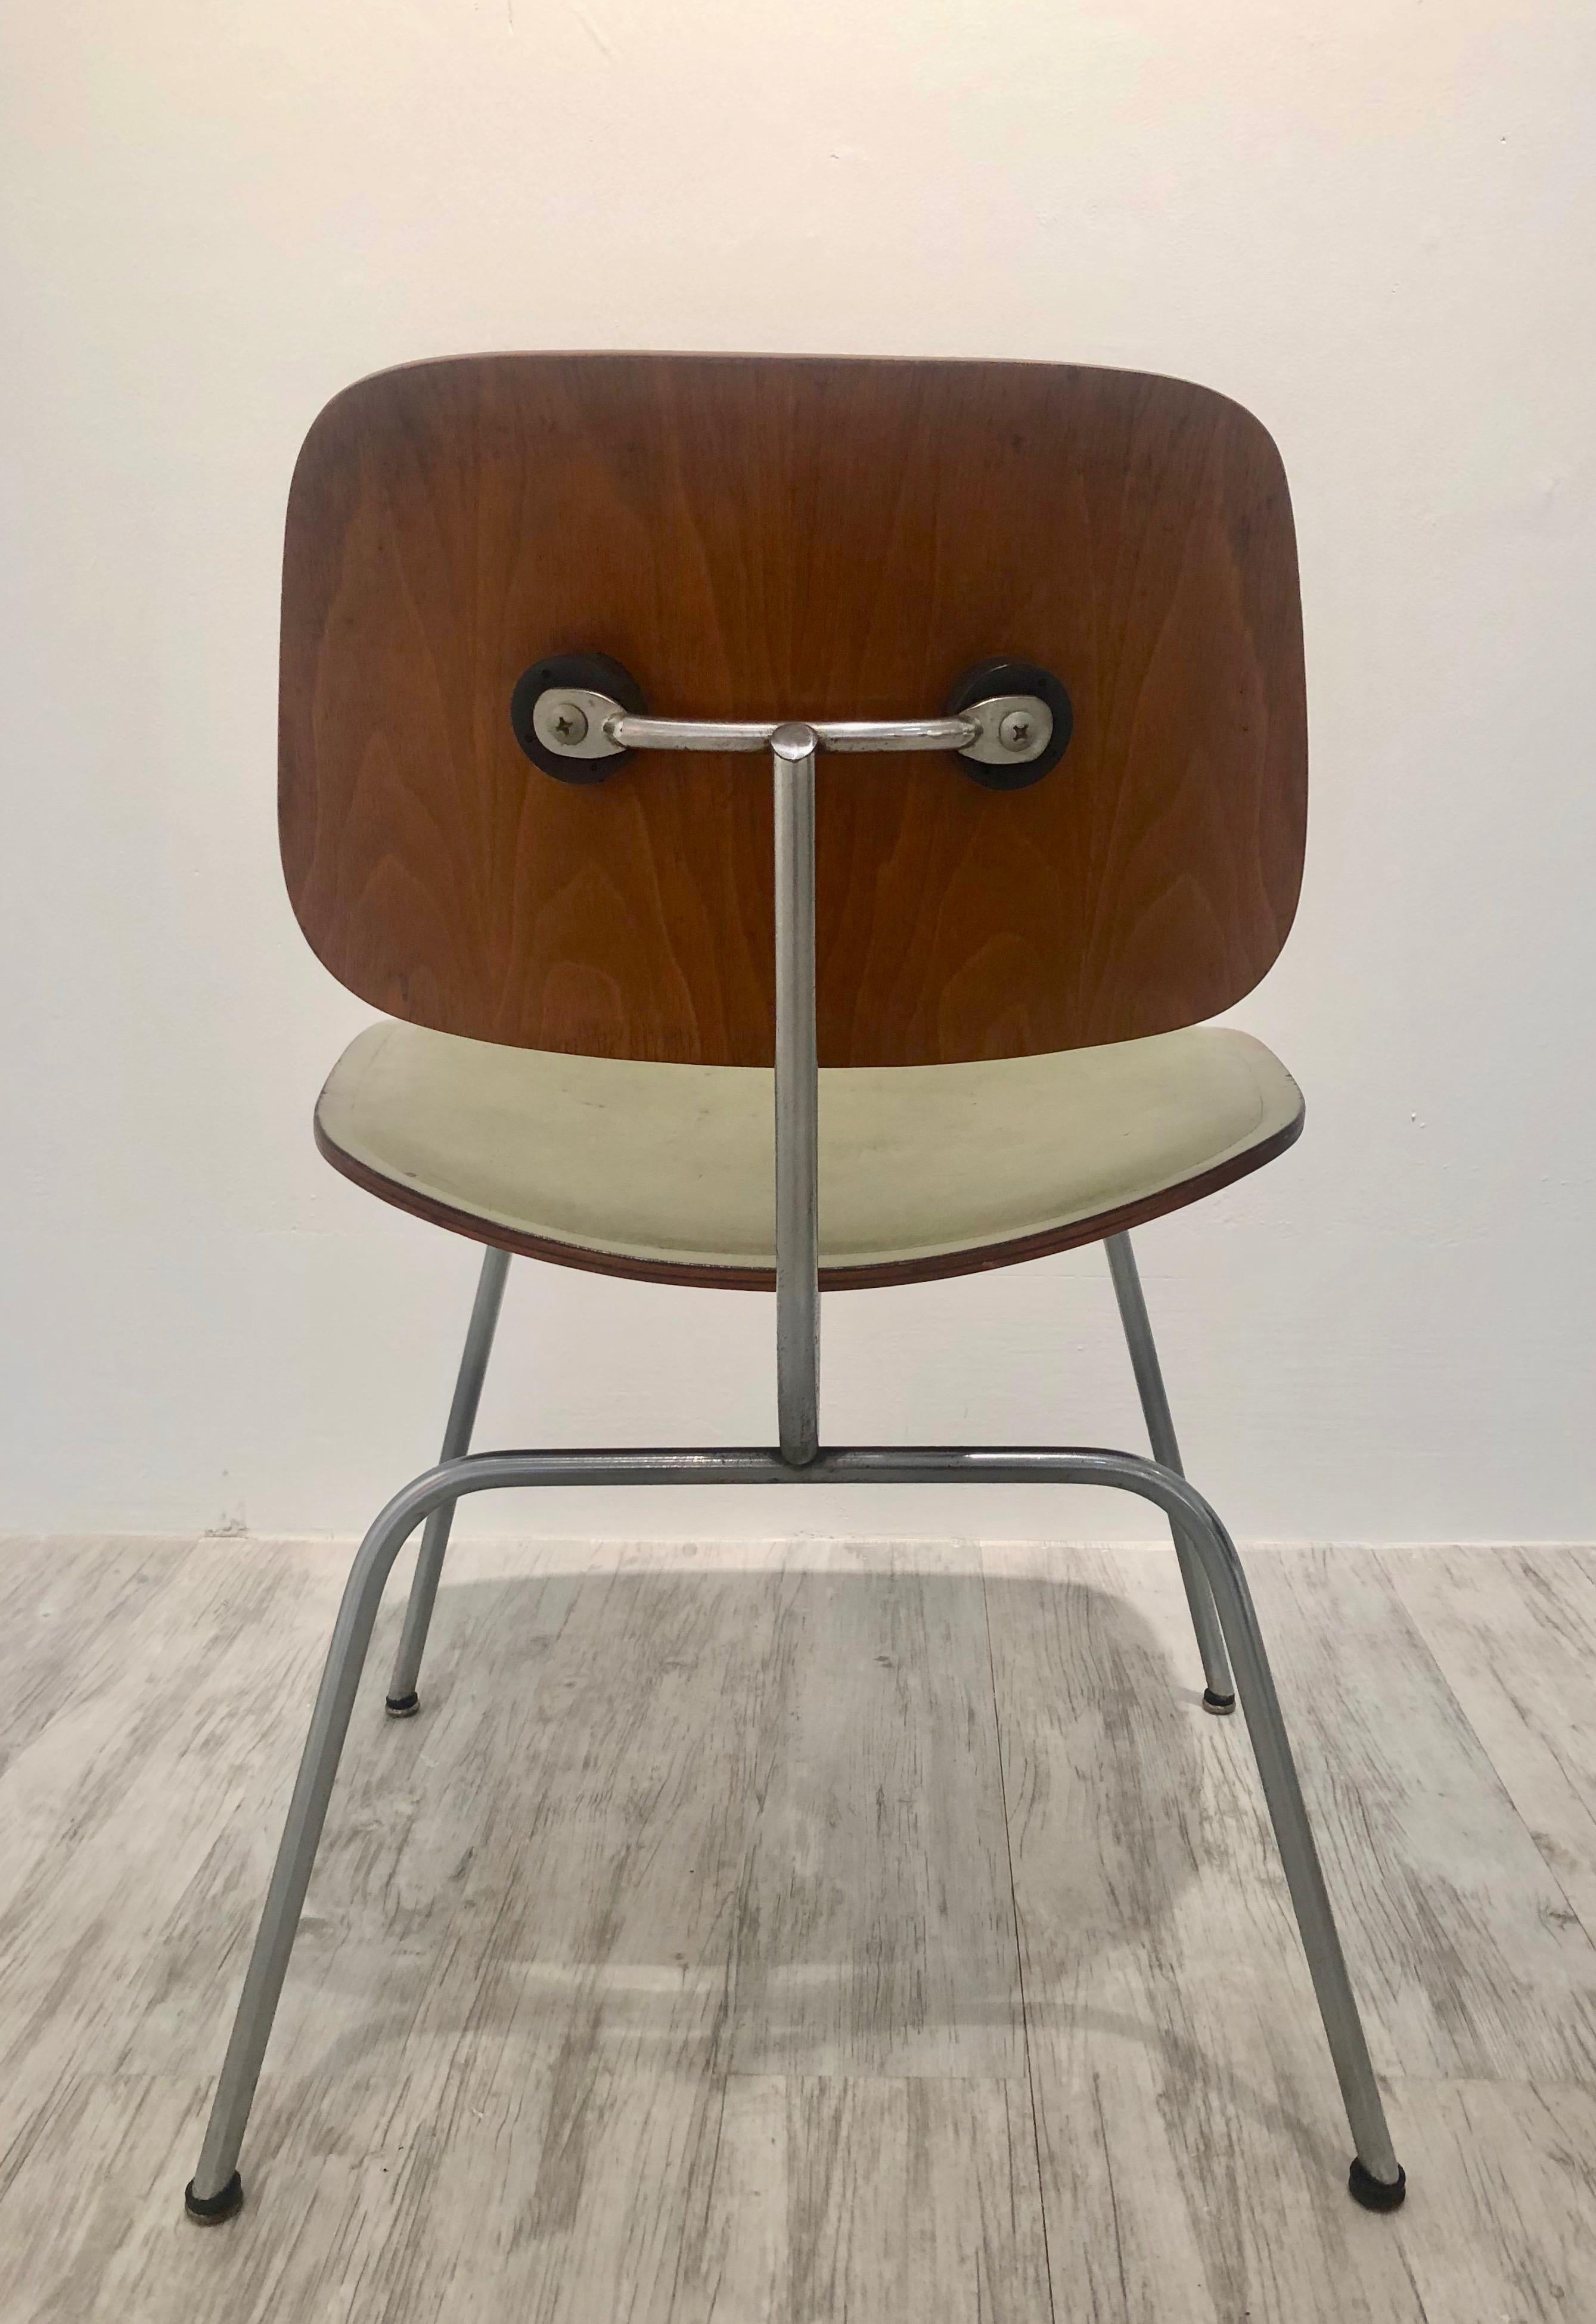 ONE OF A KIND CUSTOM SAGE GREEN LEATHER DCM CHAIR - American Modern Art by Charles and Ray Eames